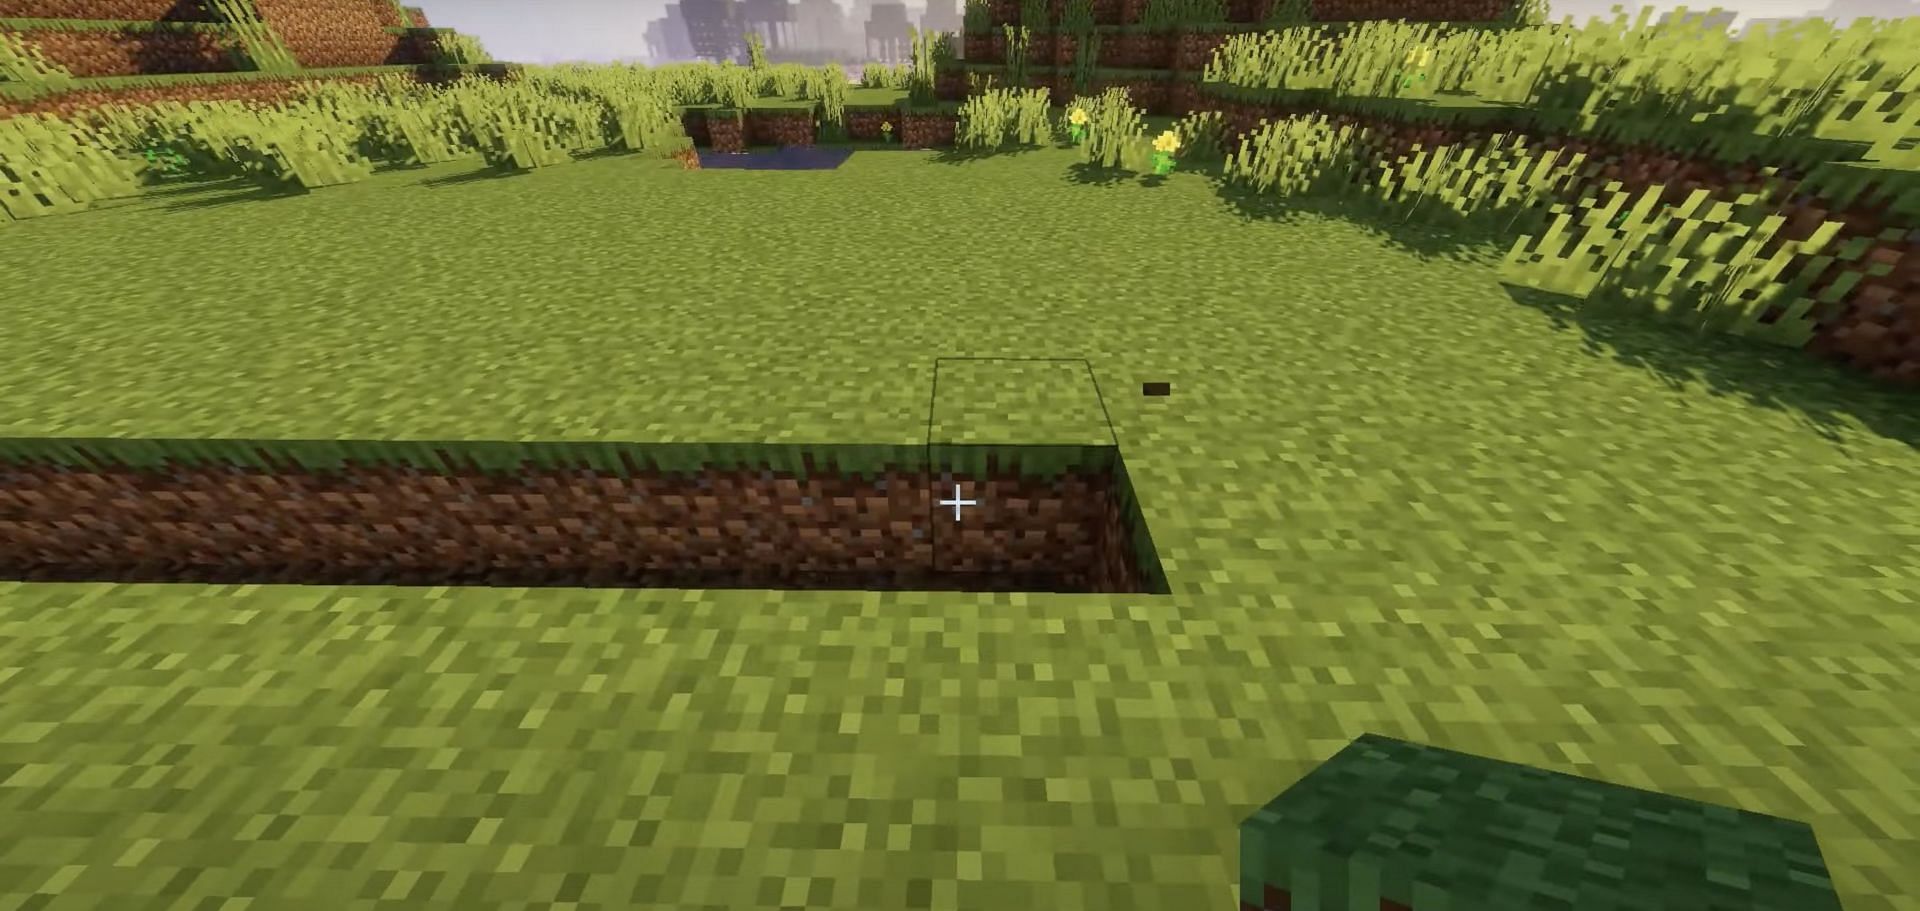 Players of Minecraft will want to dig a hole first (Image via NaMiature/YouTube)